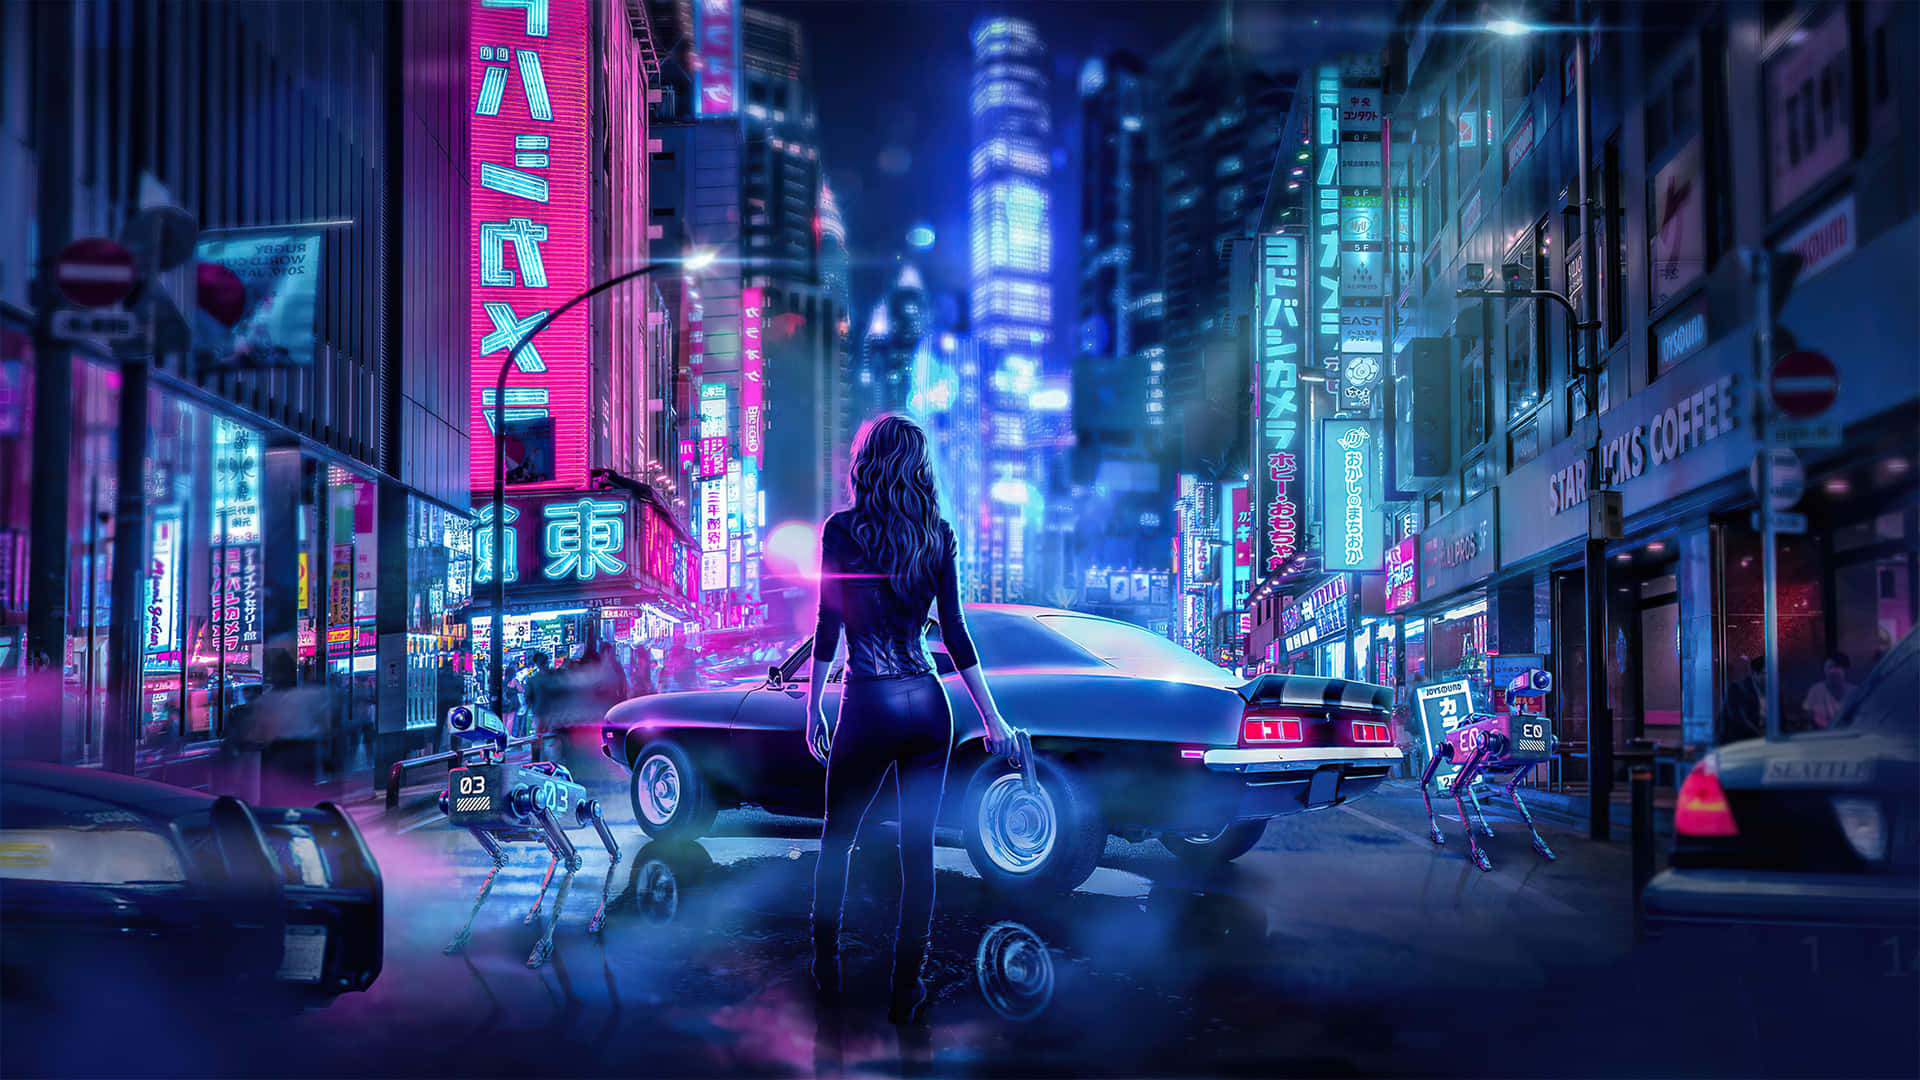 Cyberpunk Aesthetic Pictures  Download Free Images on Unsplash